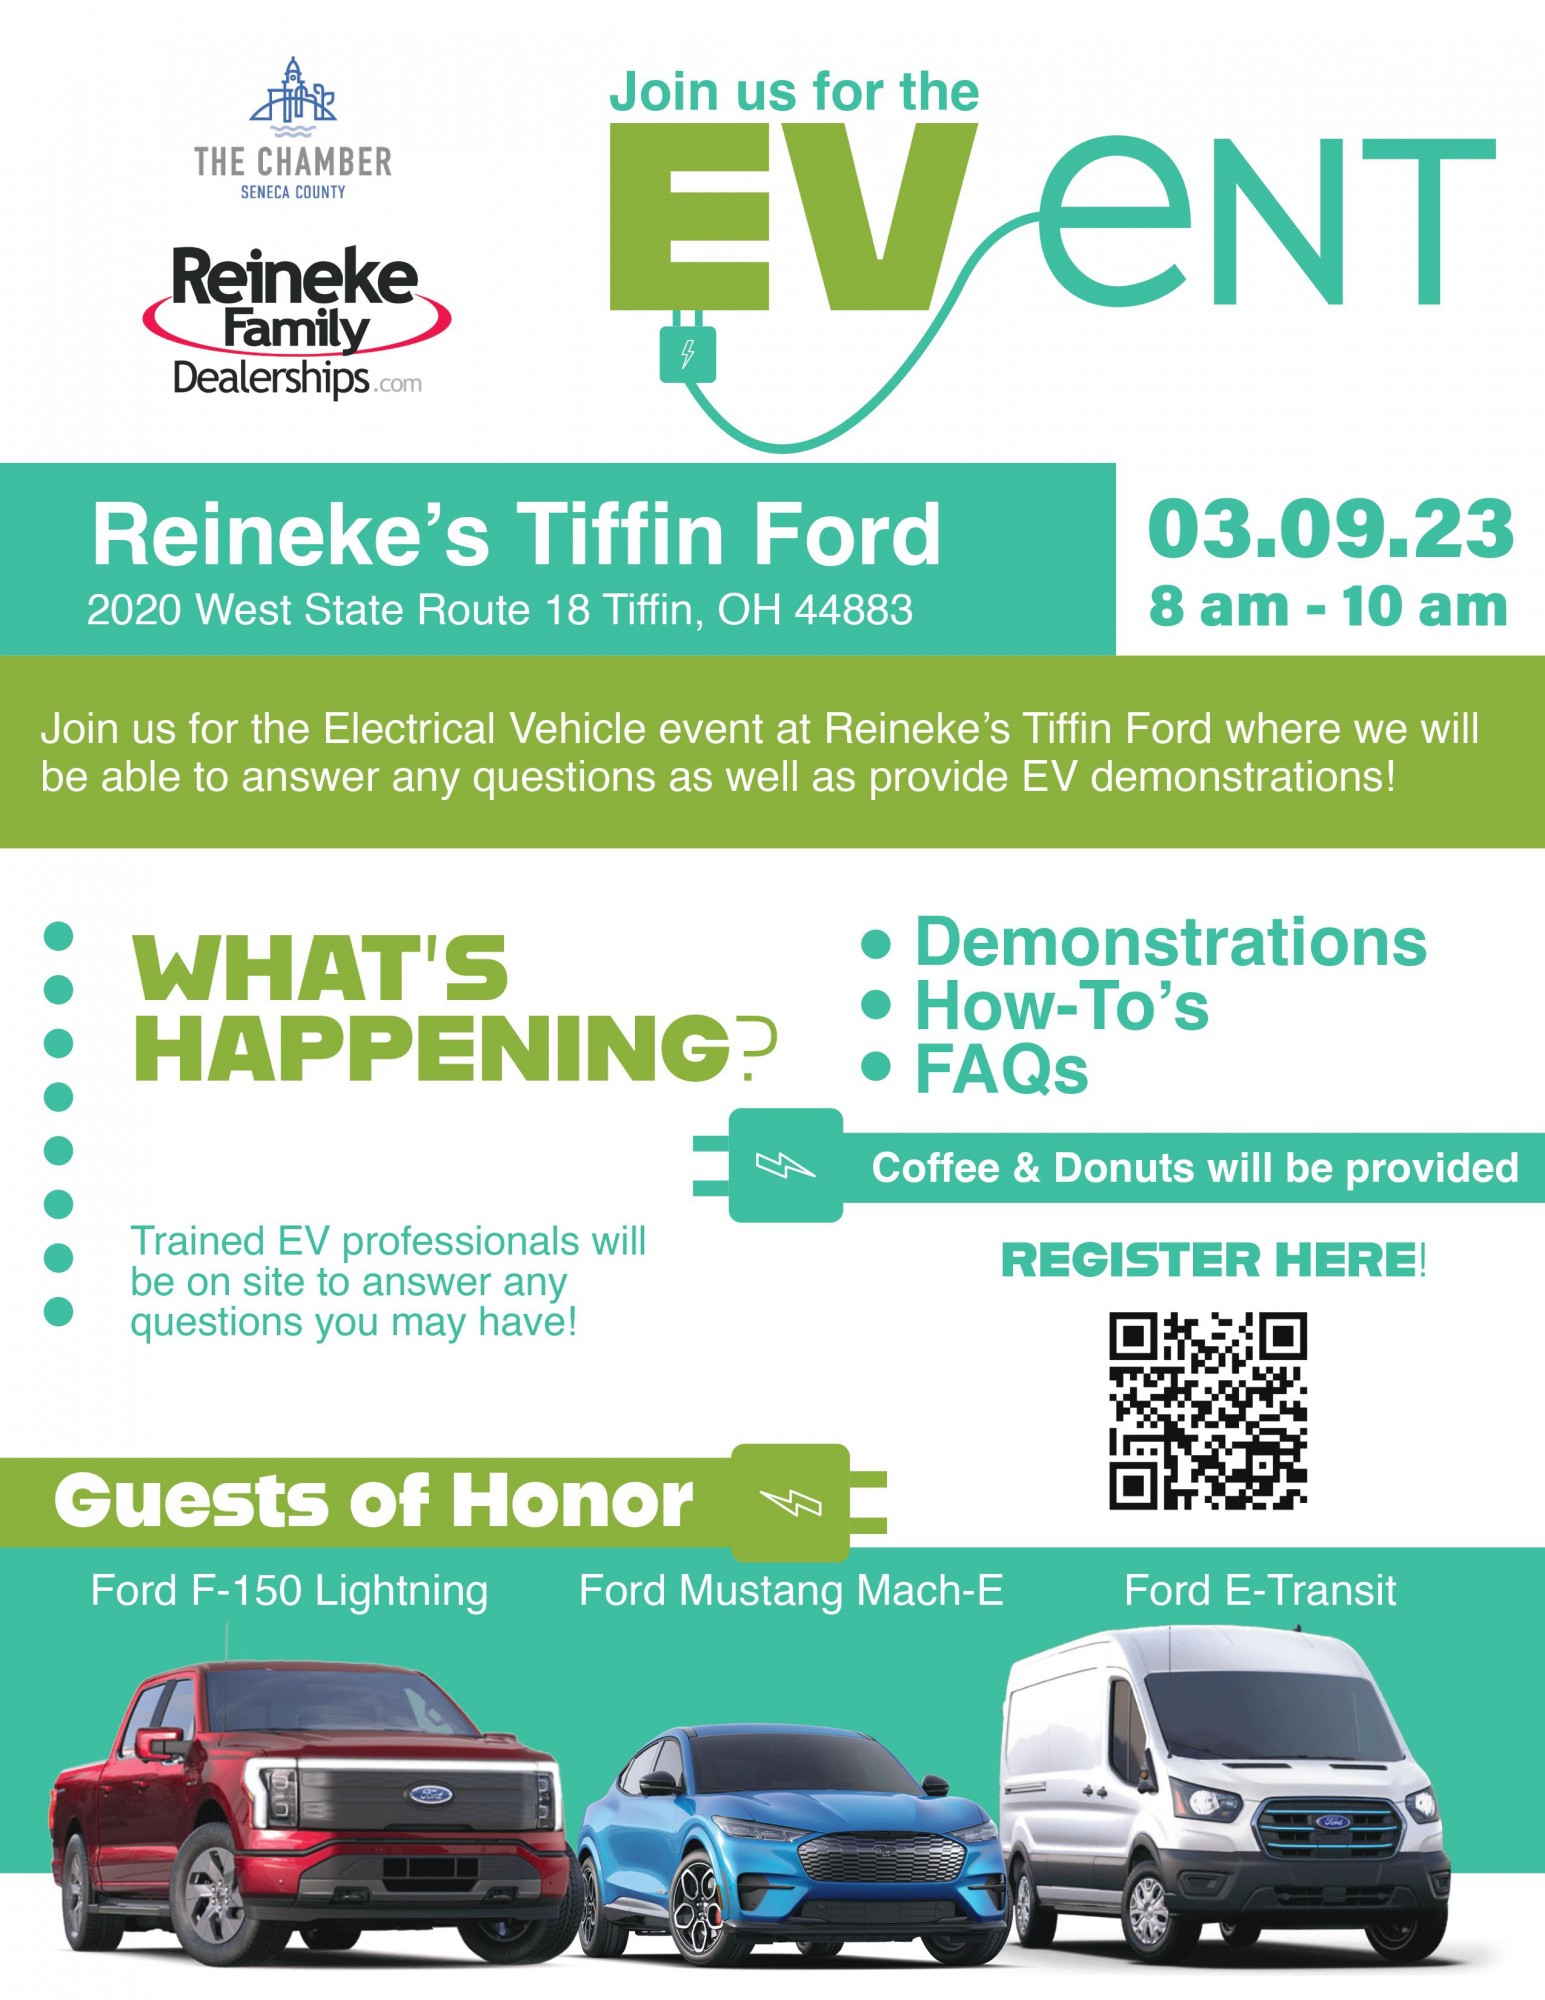 It’s Electric…at Reineke’s Tiffin Ford Lincoln!